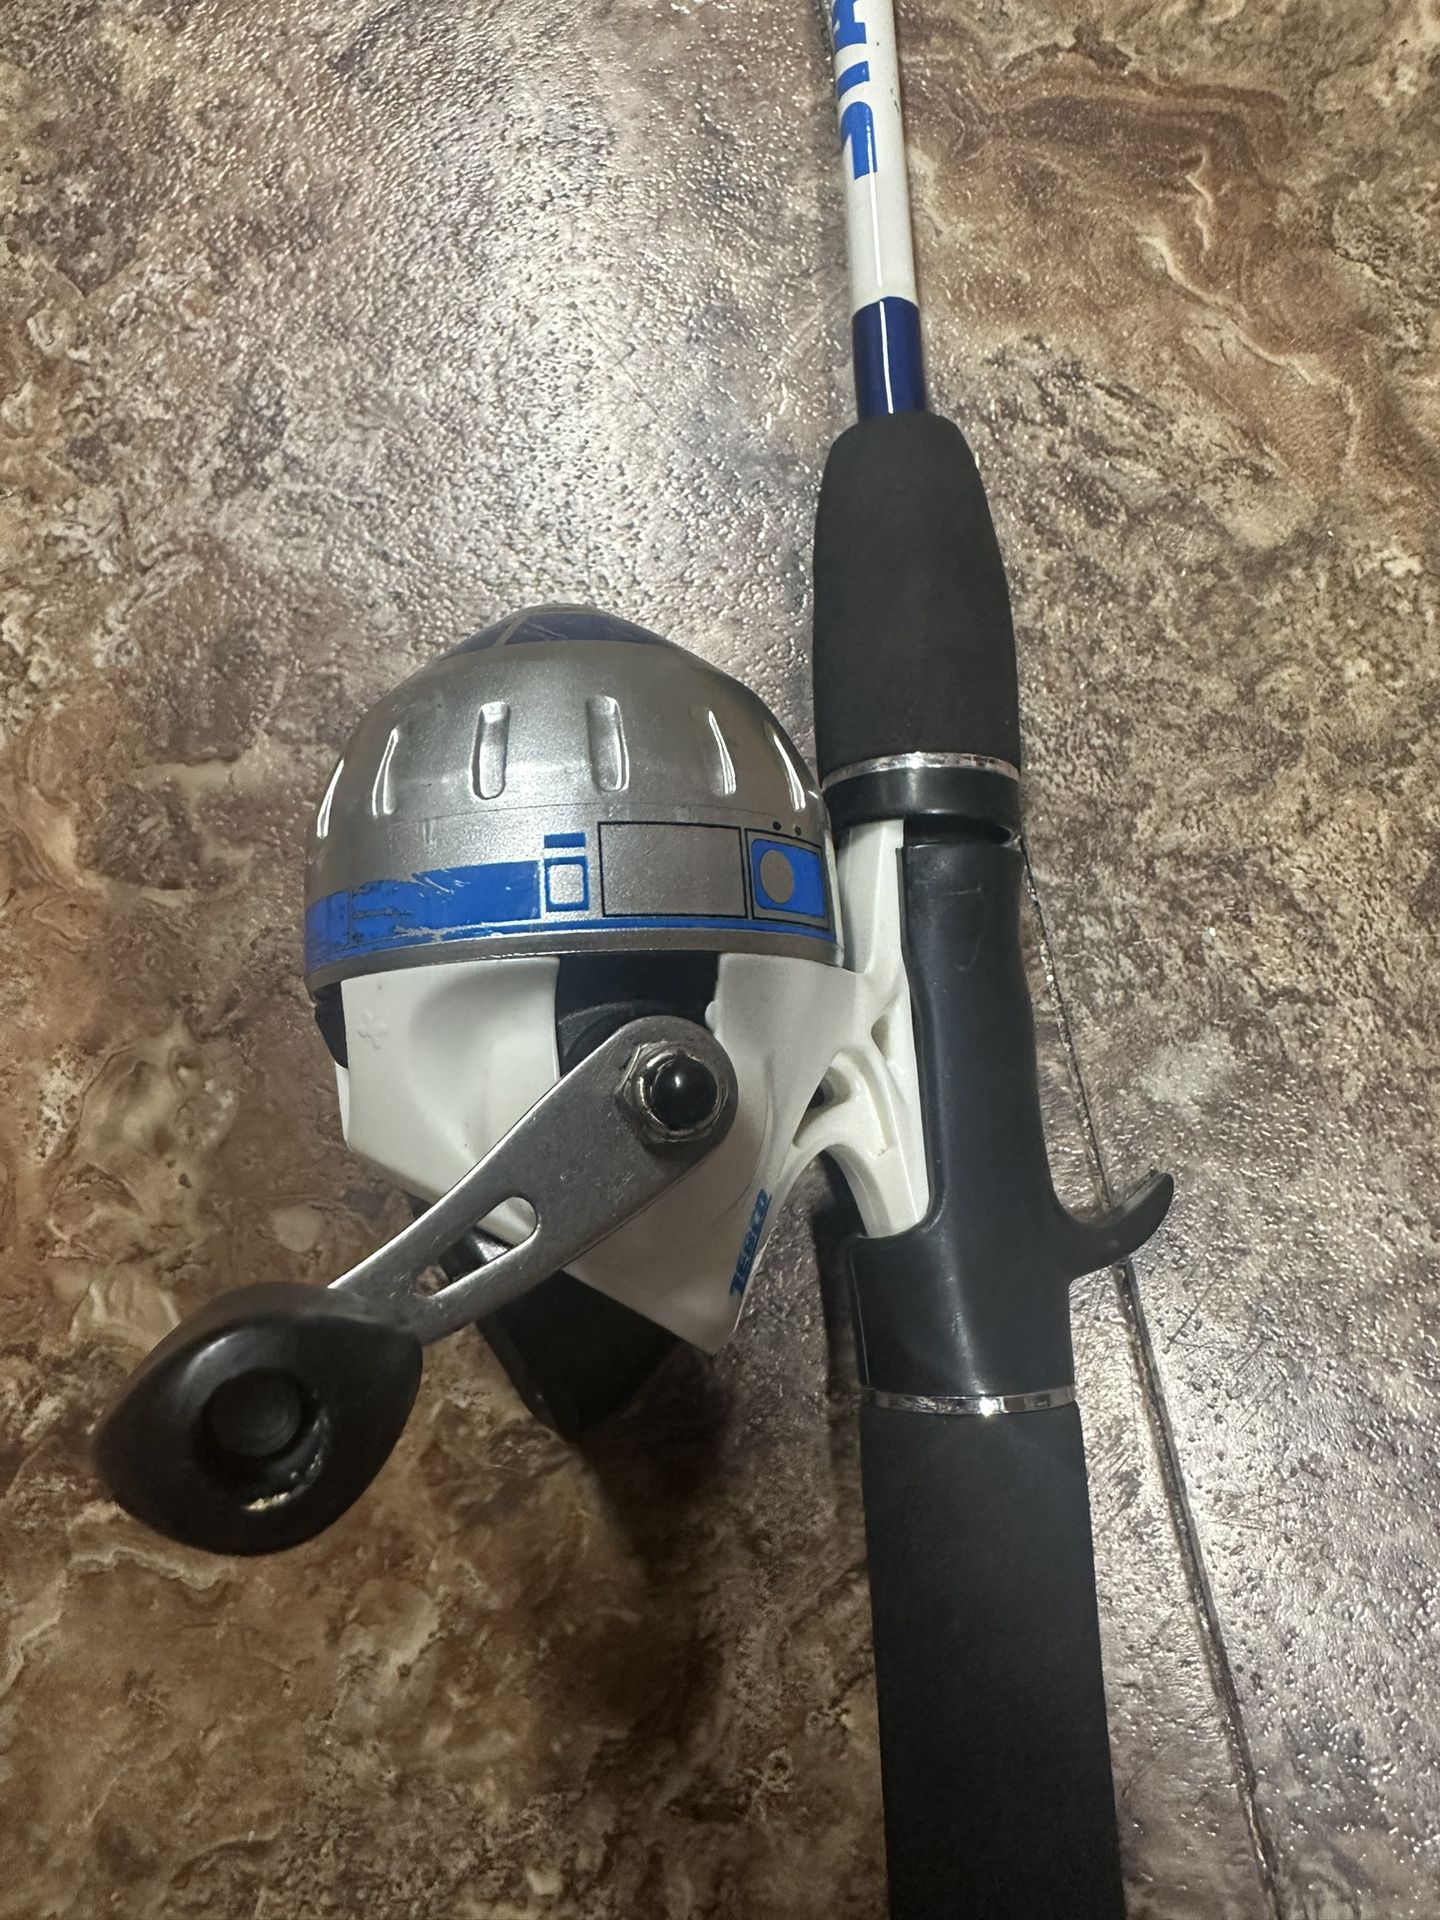 Fishing Combo By Zebco Star Wars Edition for Sale in Upr Makefield, PA -  OfferUp